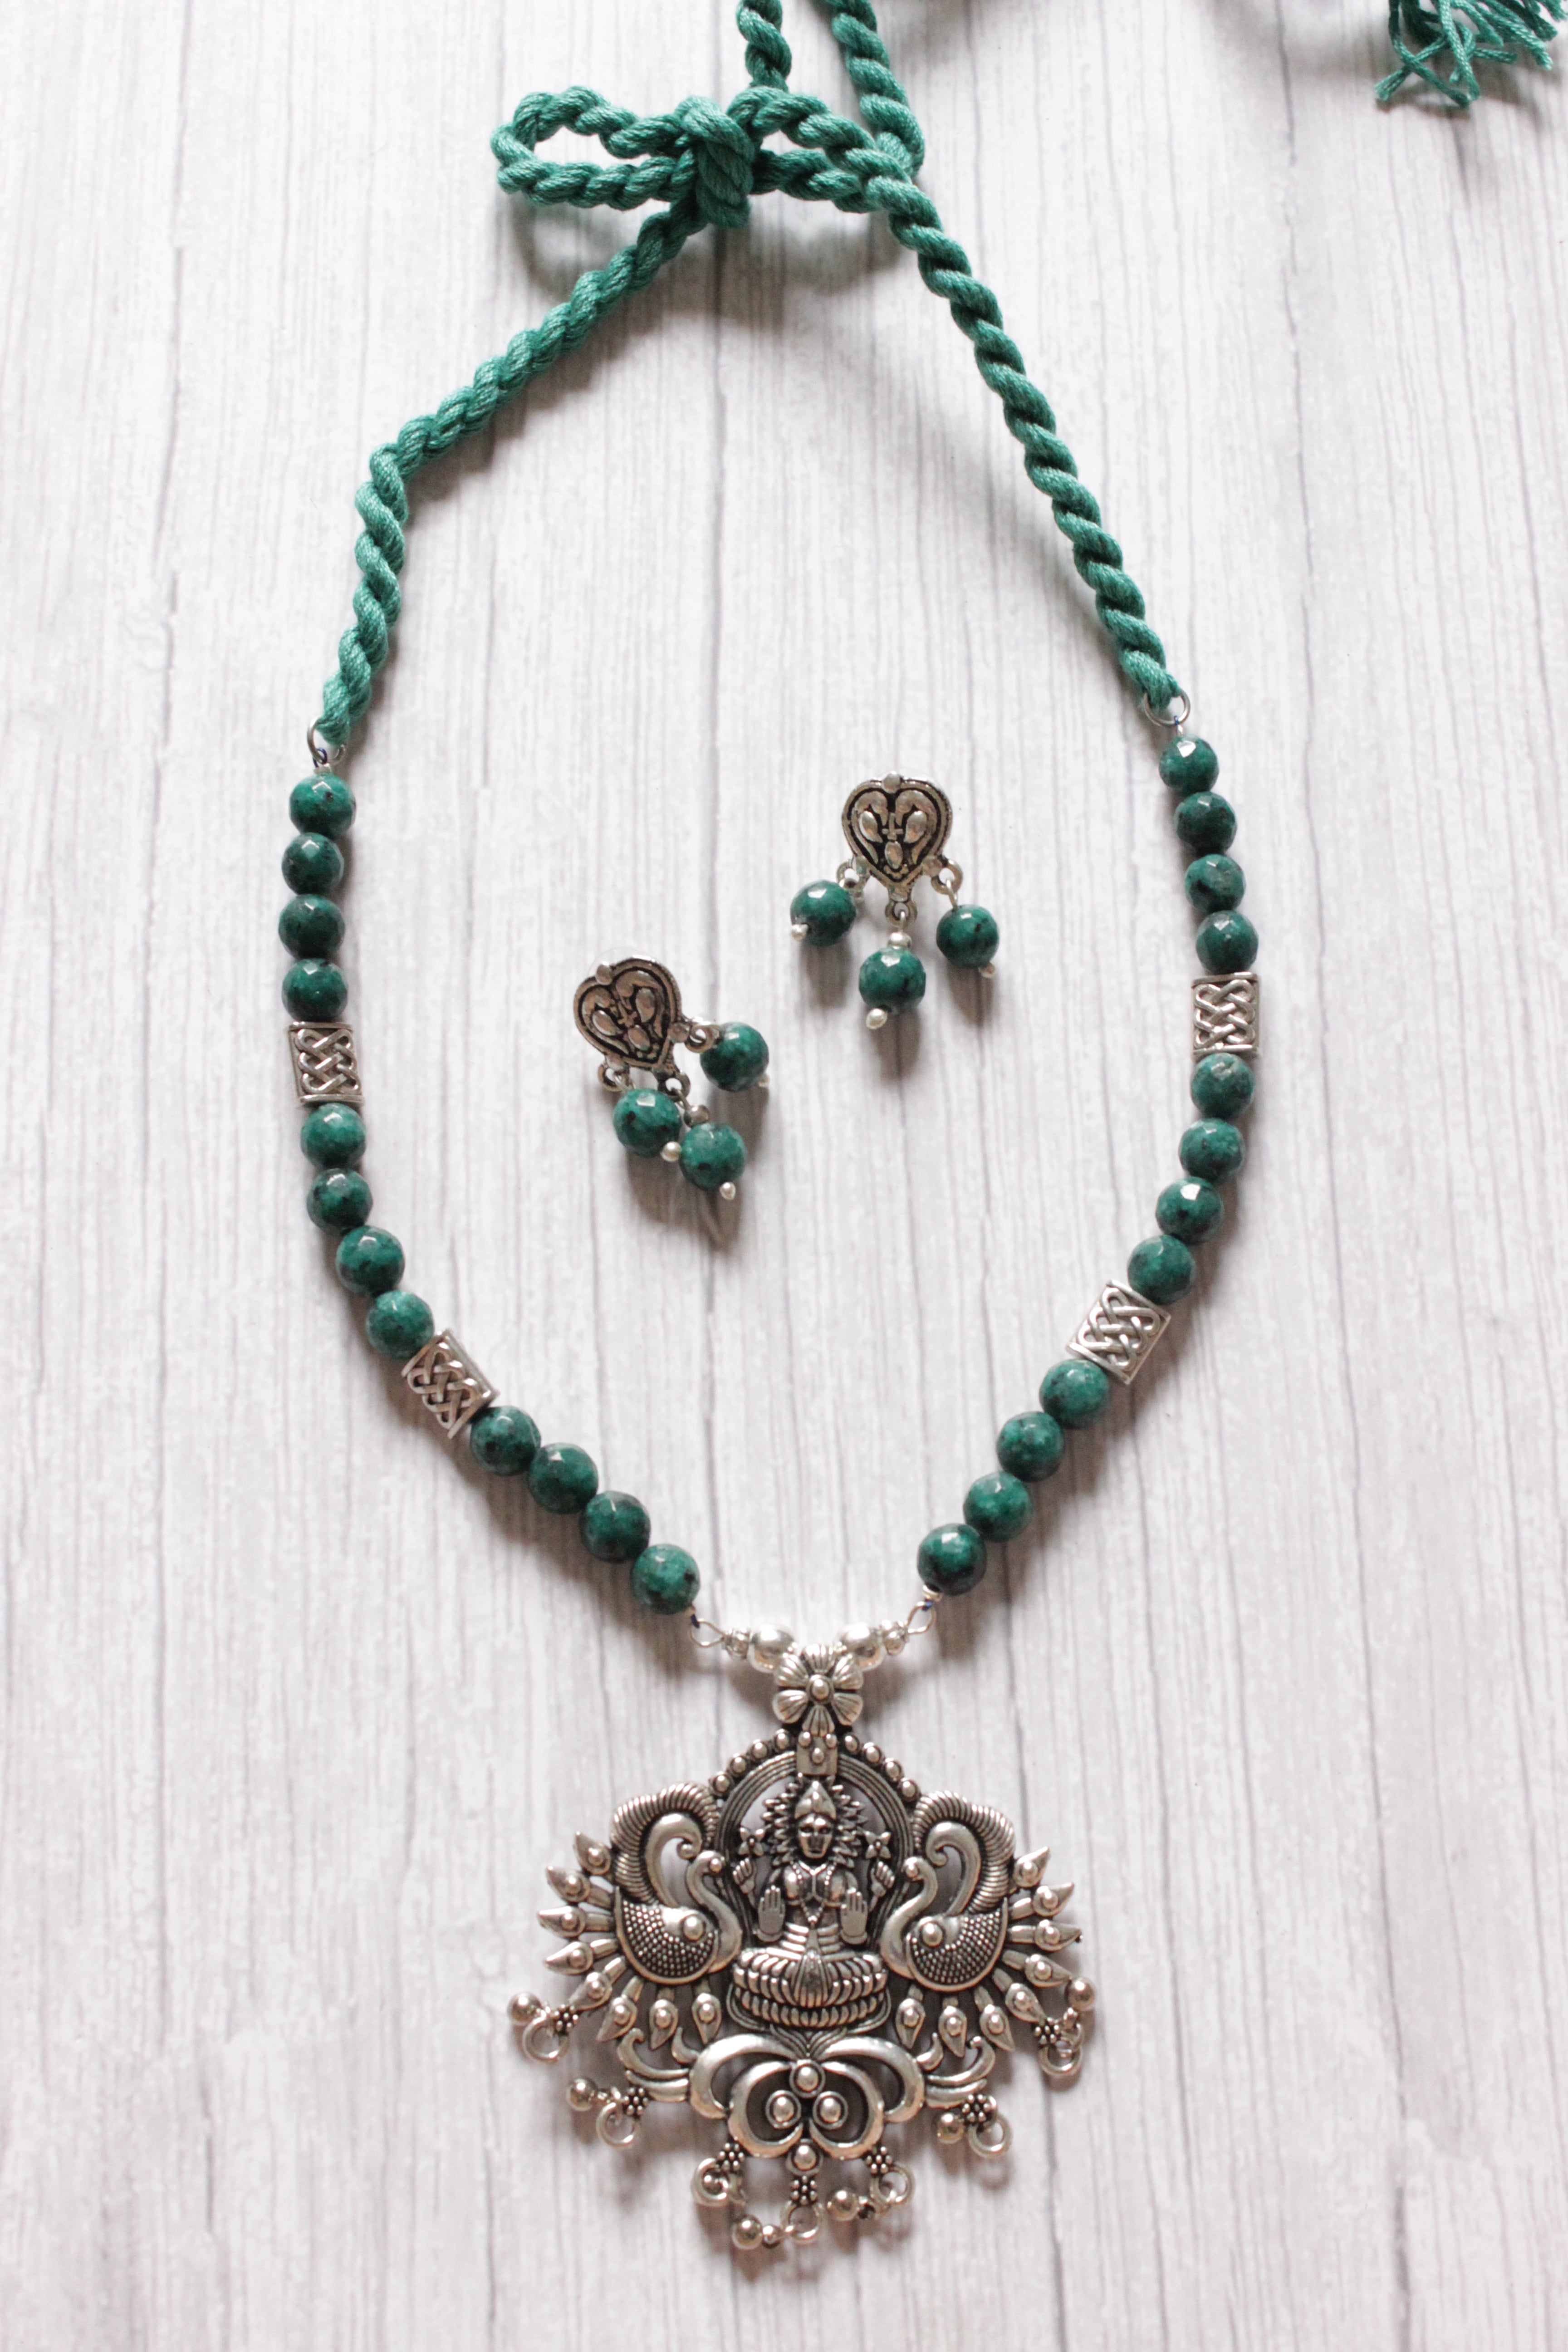 Green Jade Beads Rope Closure Necklace Set with Silver Finish Religious Metal Pendant